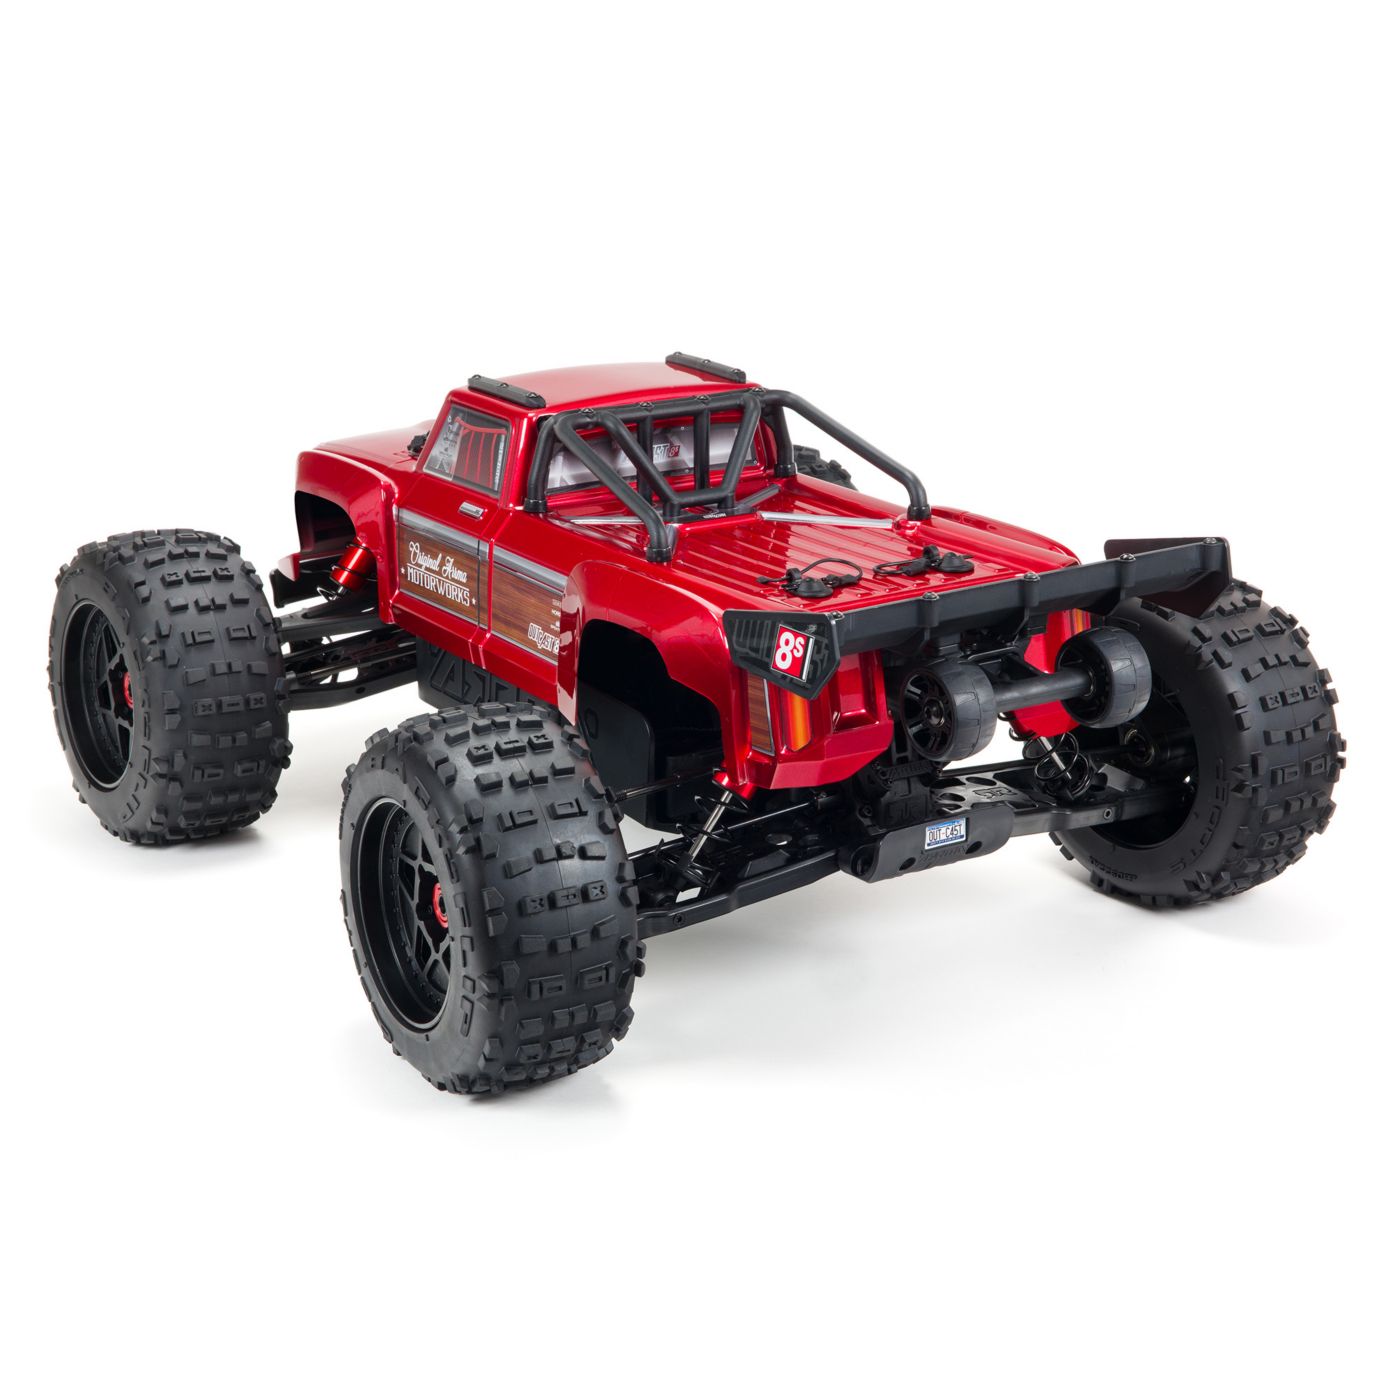 Arrma 1/5 Outcast 8S BLX 4WD Brushless Stunt Truck RC Driver